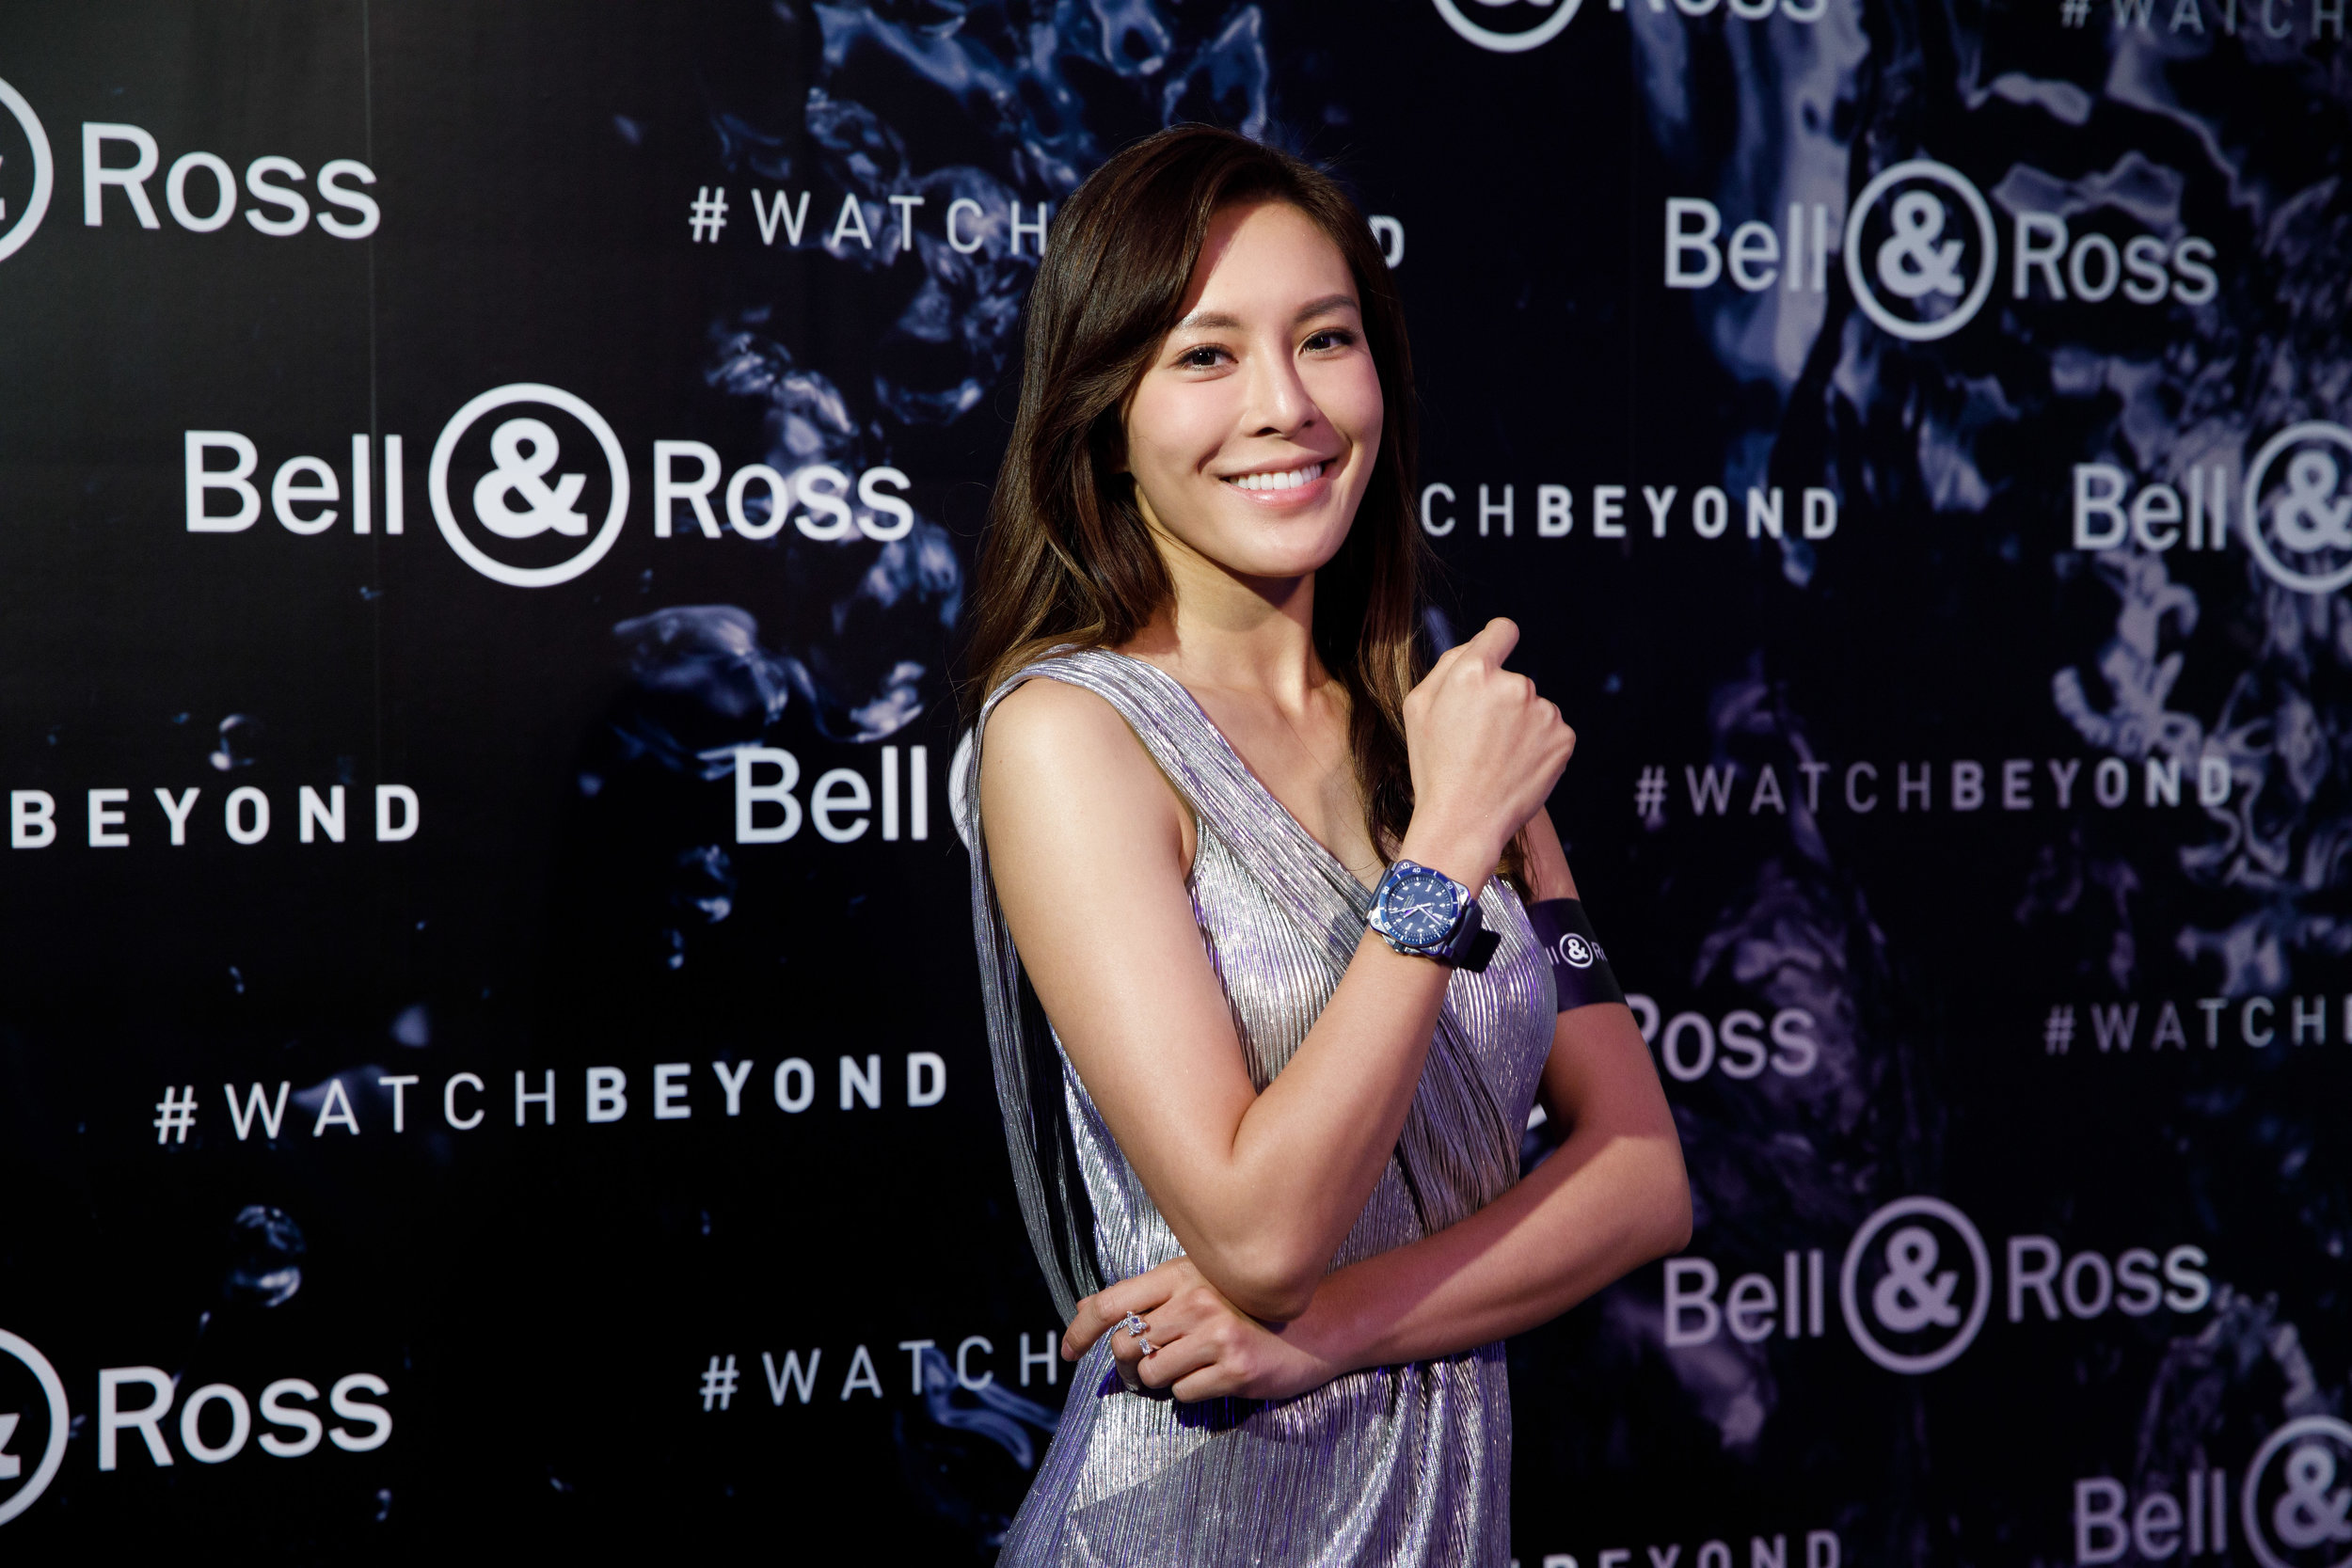 Bell & Ross Event. Kelly Cheung